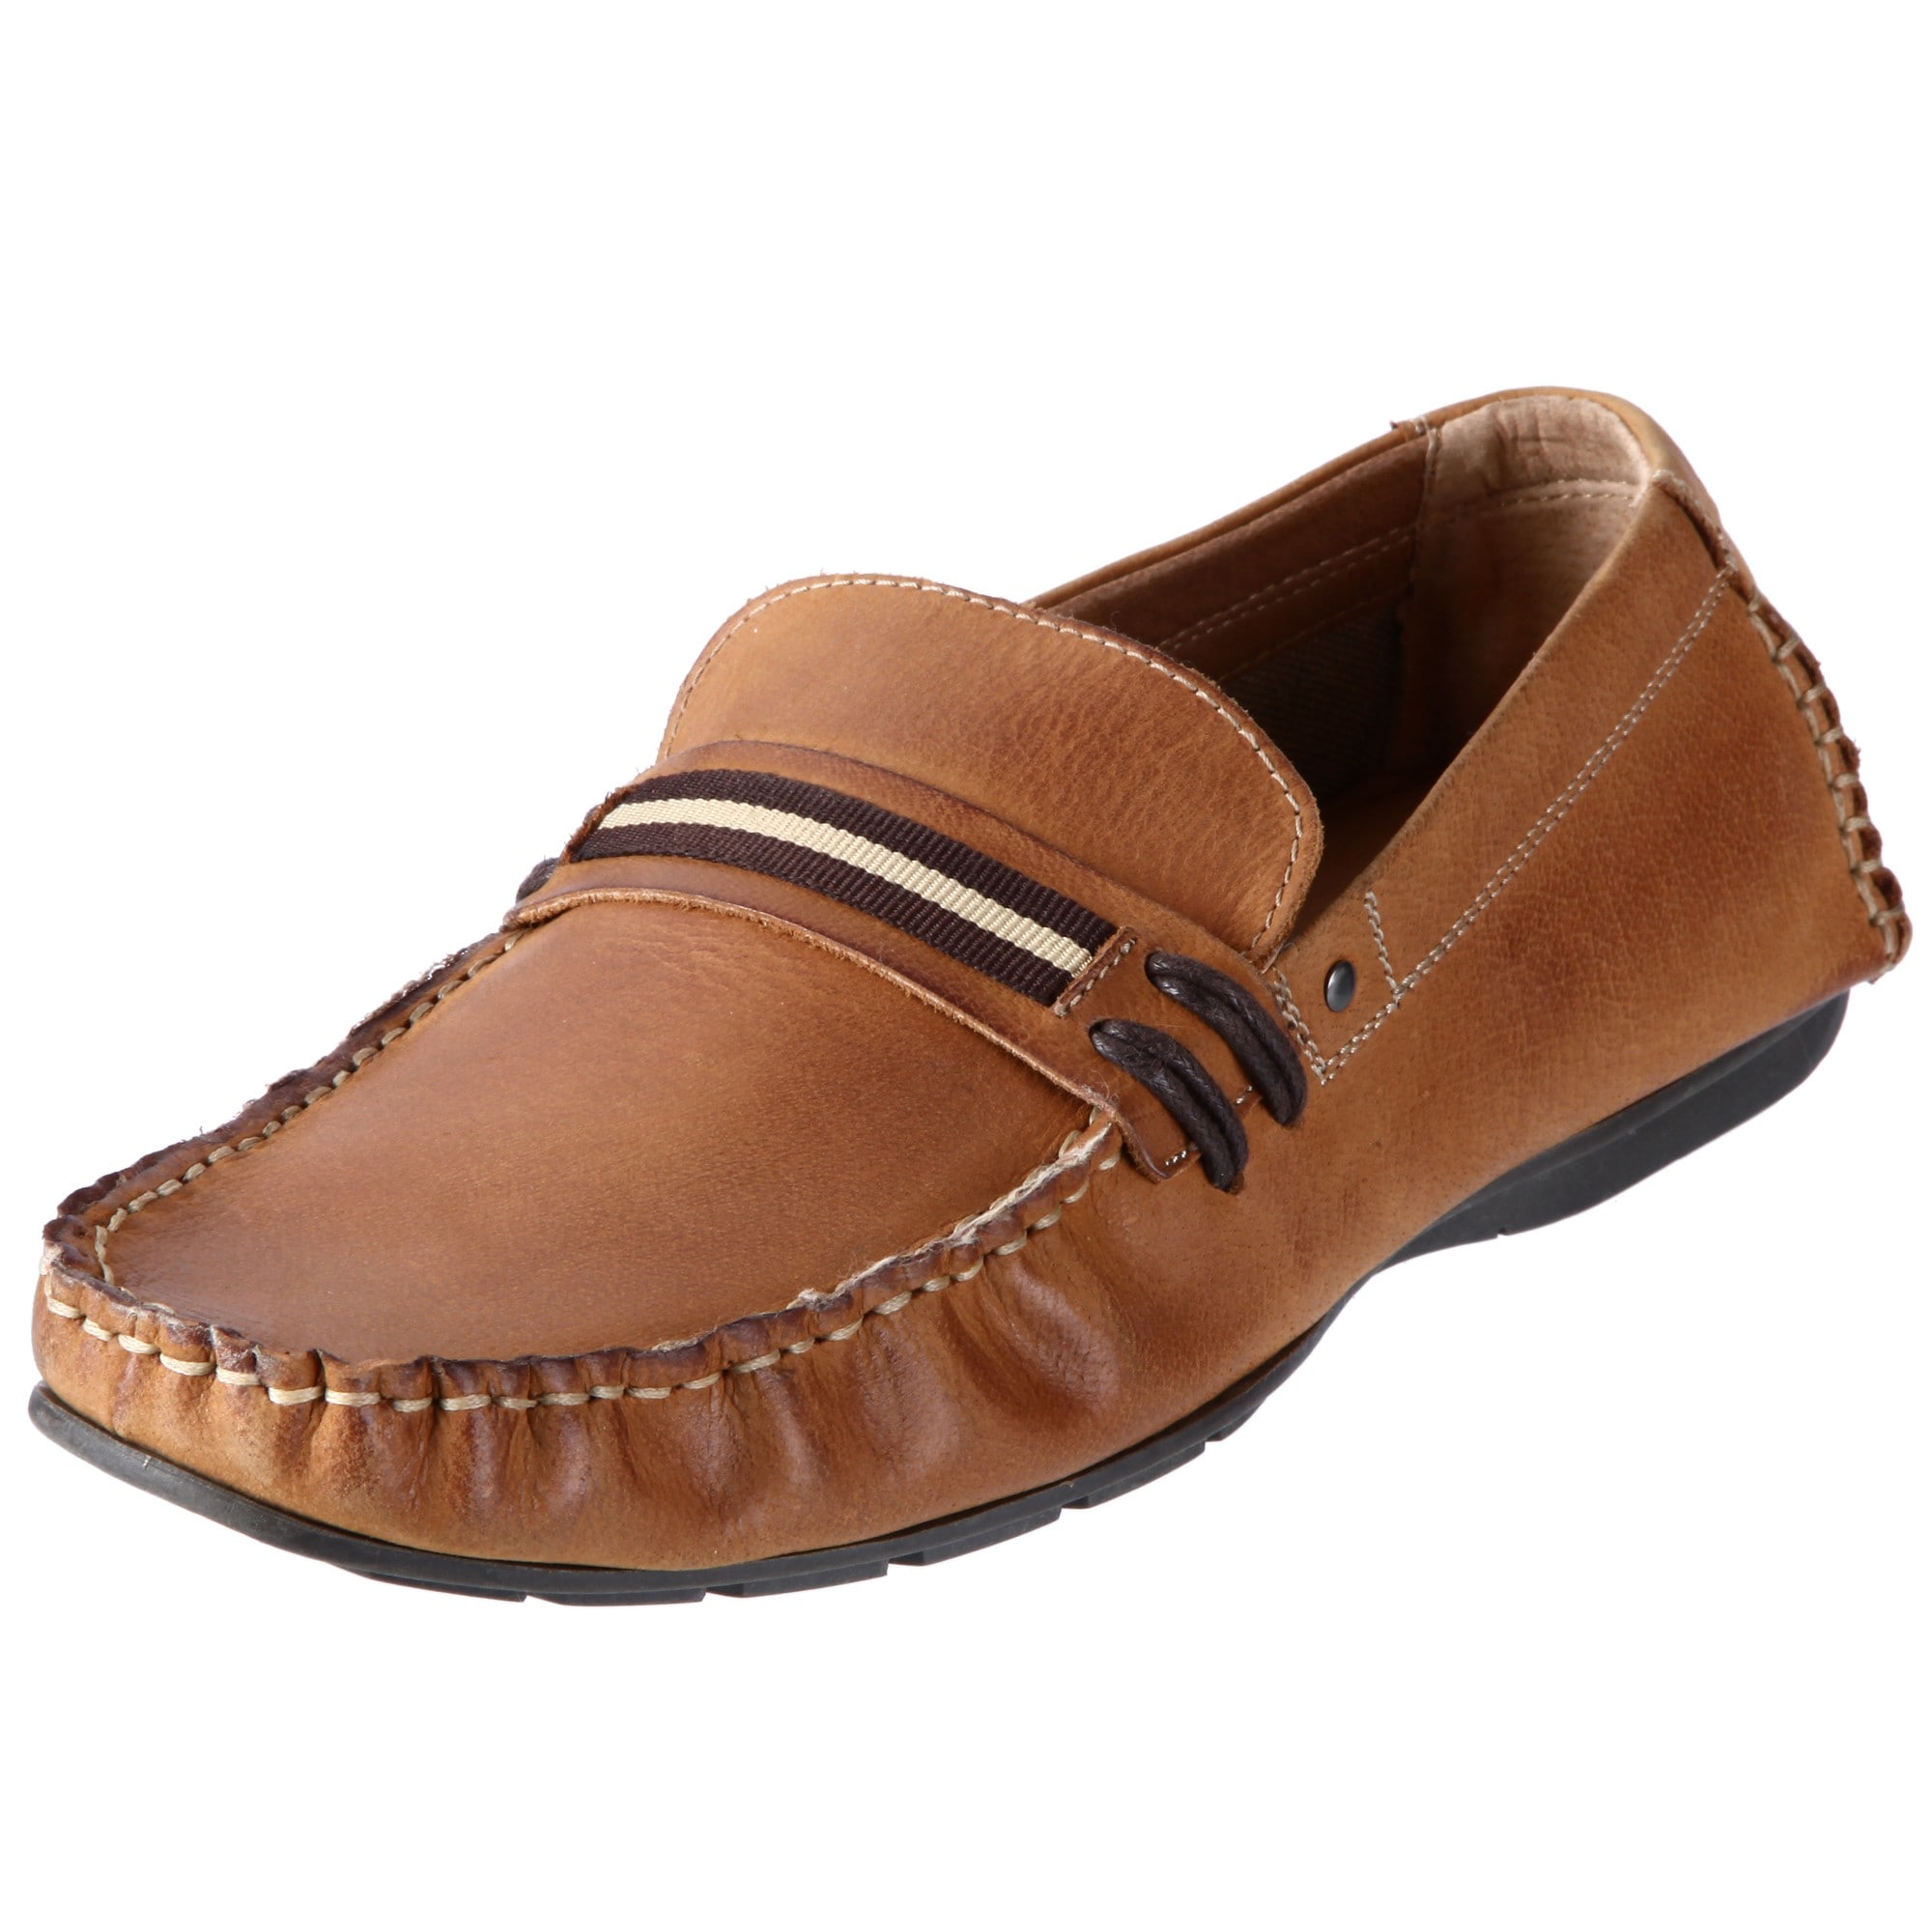 Grab' Slip-on Driver Shoes - Overstock 